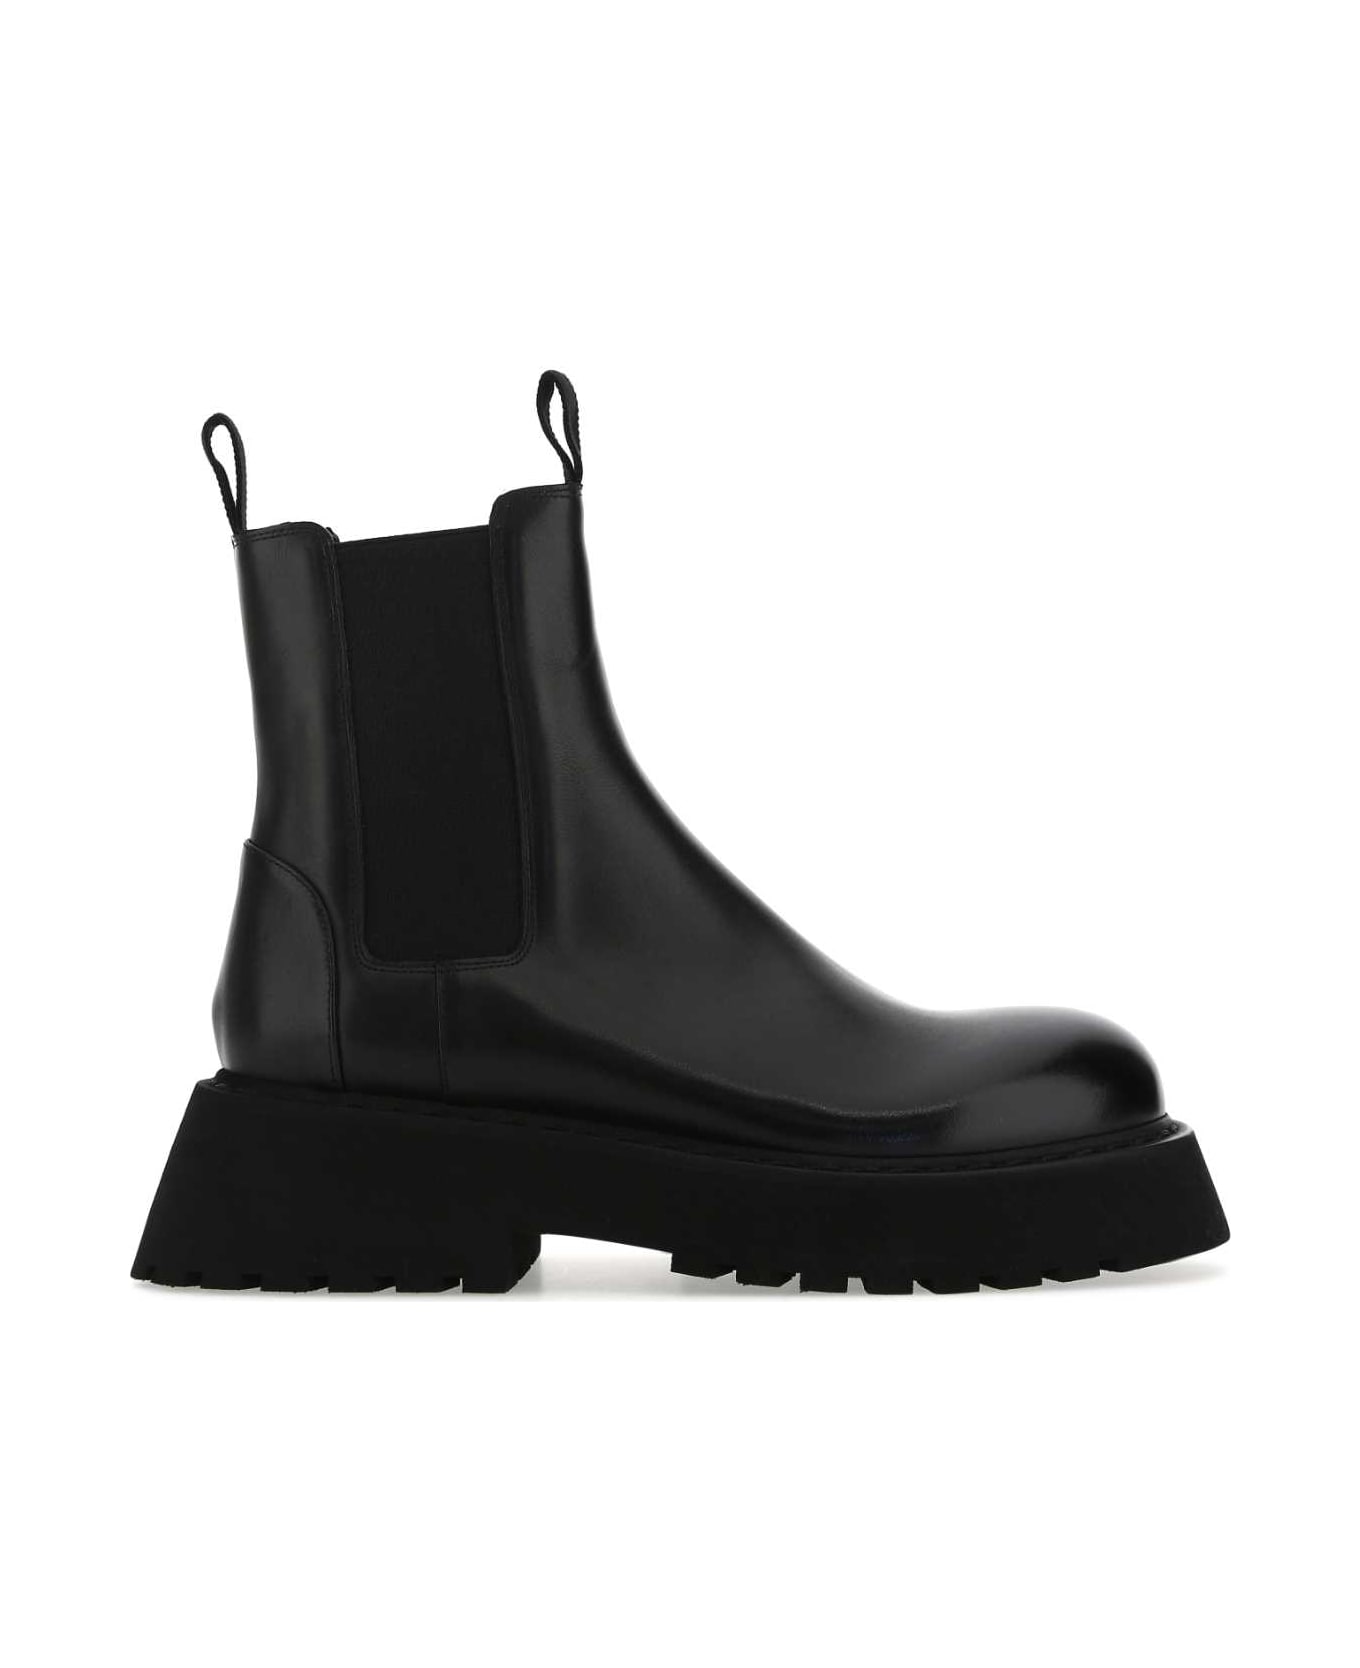 Marsell Black Leather Ankle Boots - BLACK ブーツ